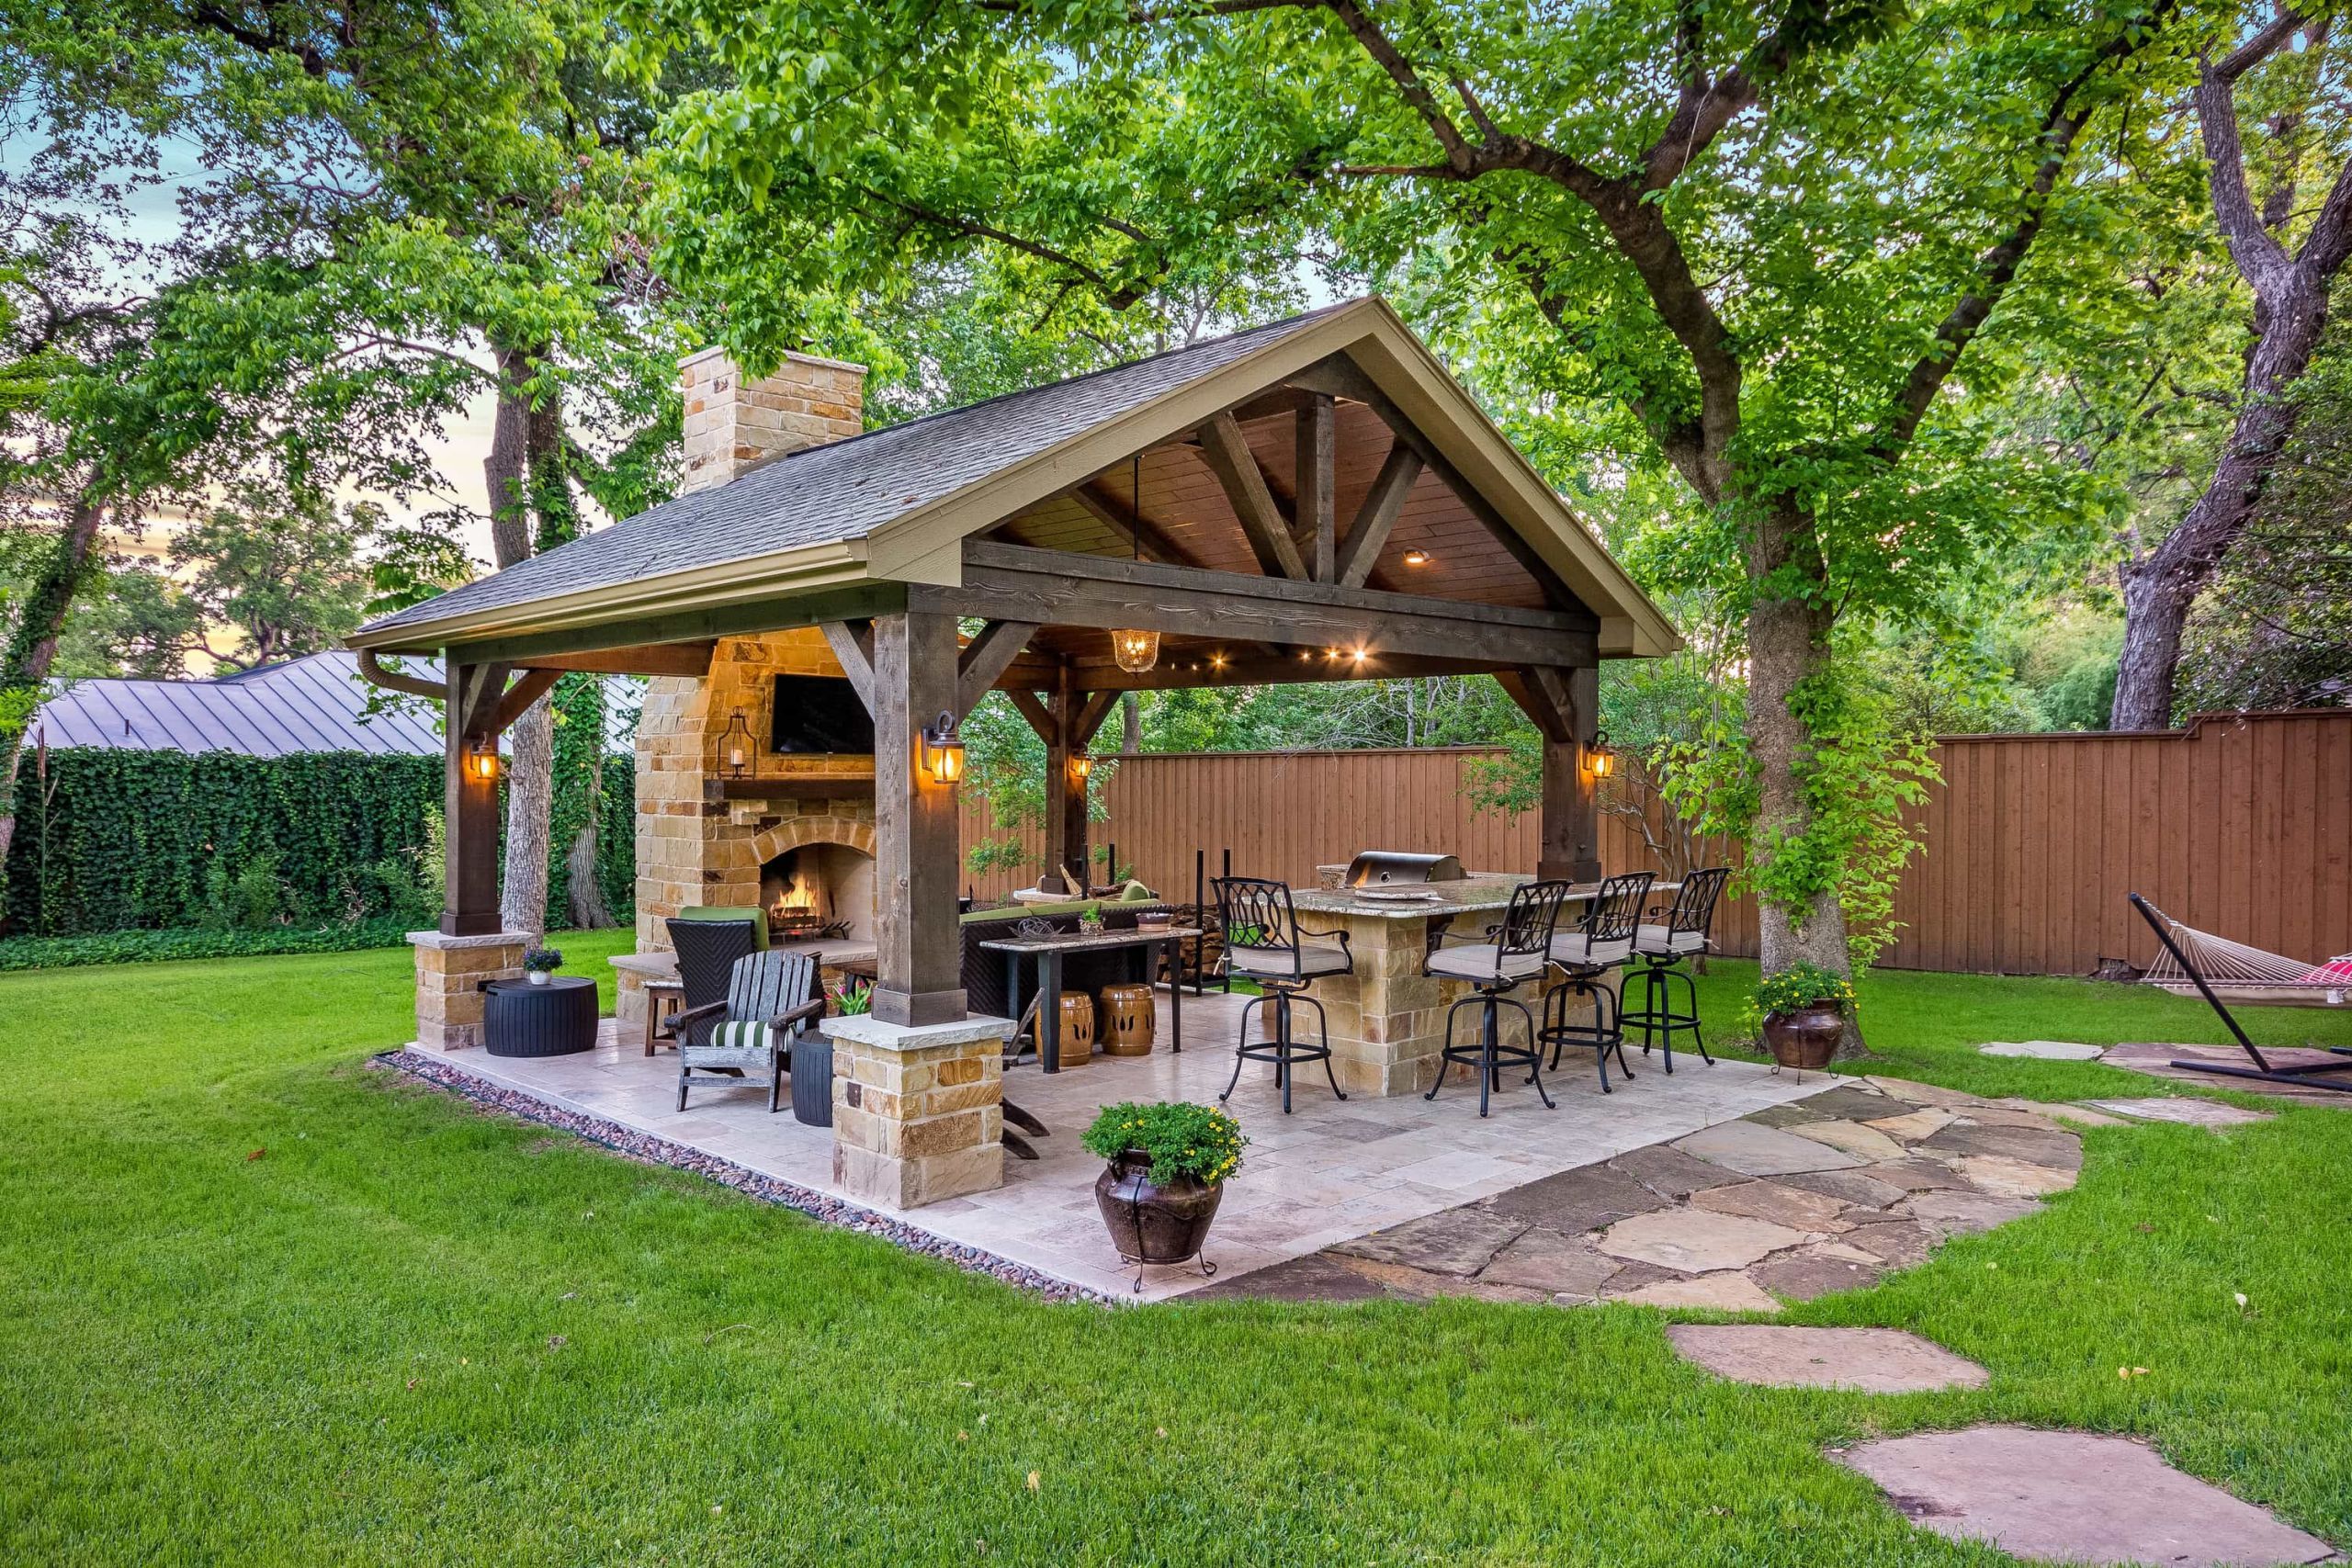 Covered Outdoor Kitchen Structures
 Detached Fireplace Covered Outdoor Patio Backyard Ideas